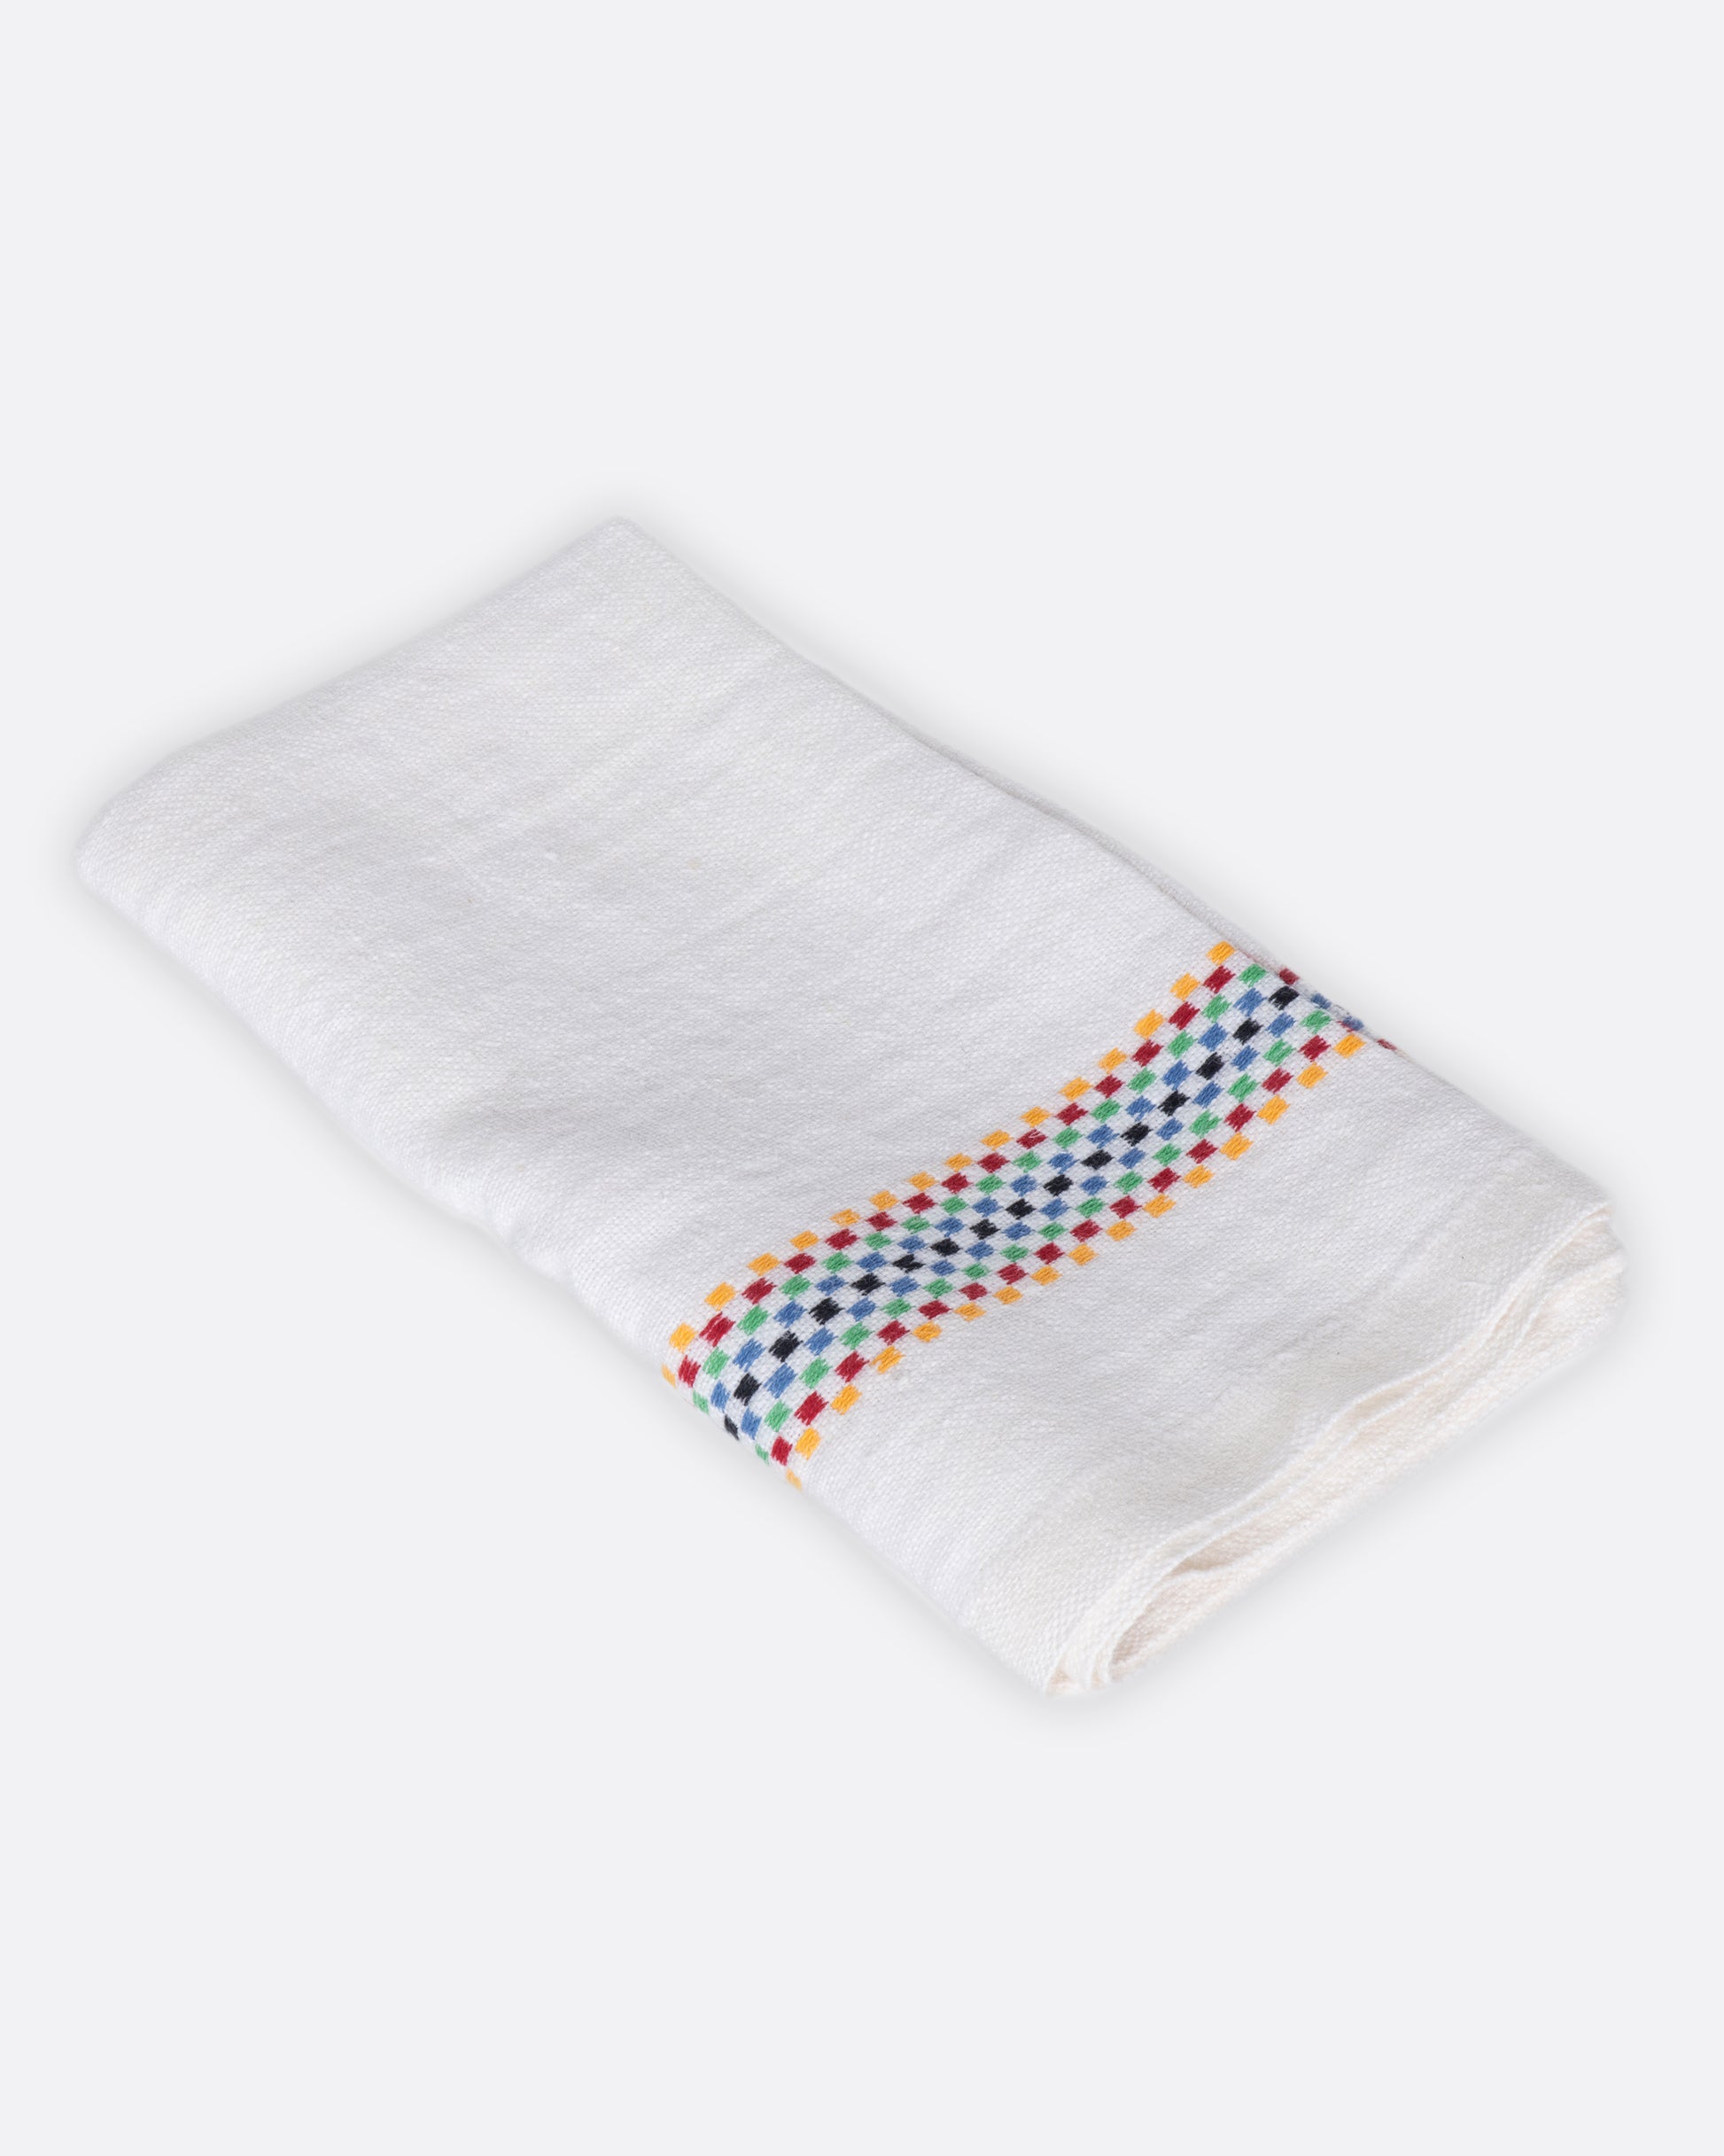 A white linen napkin with rainbow checkered embroidered stripes